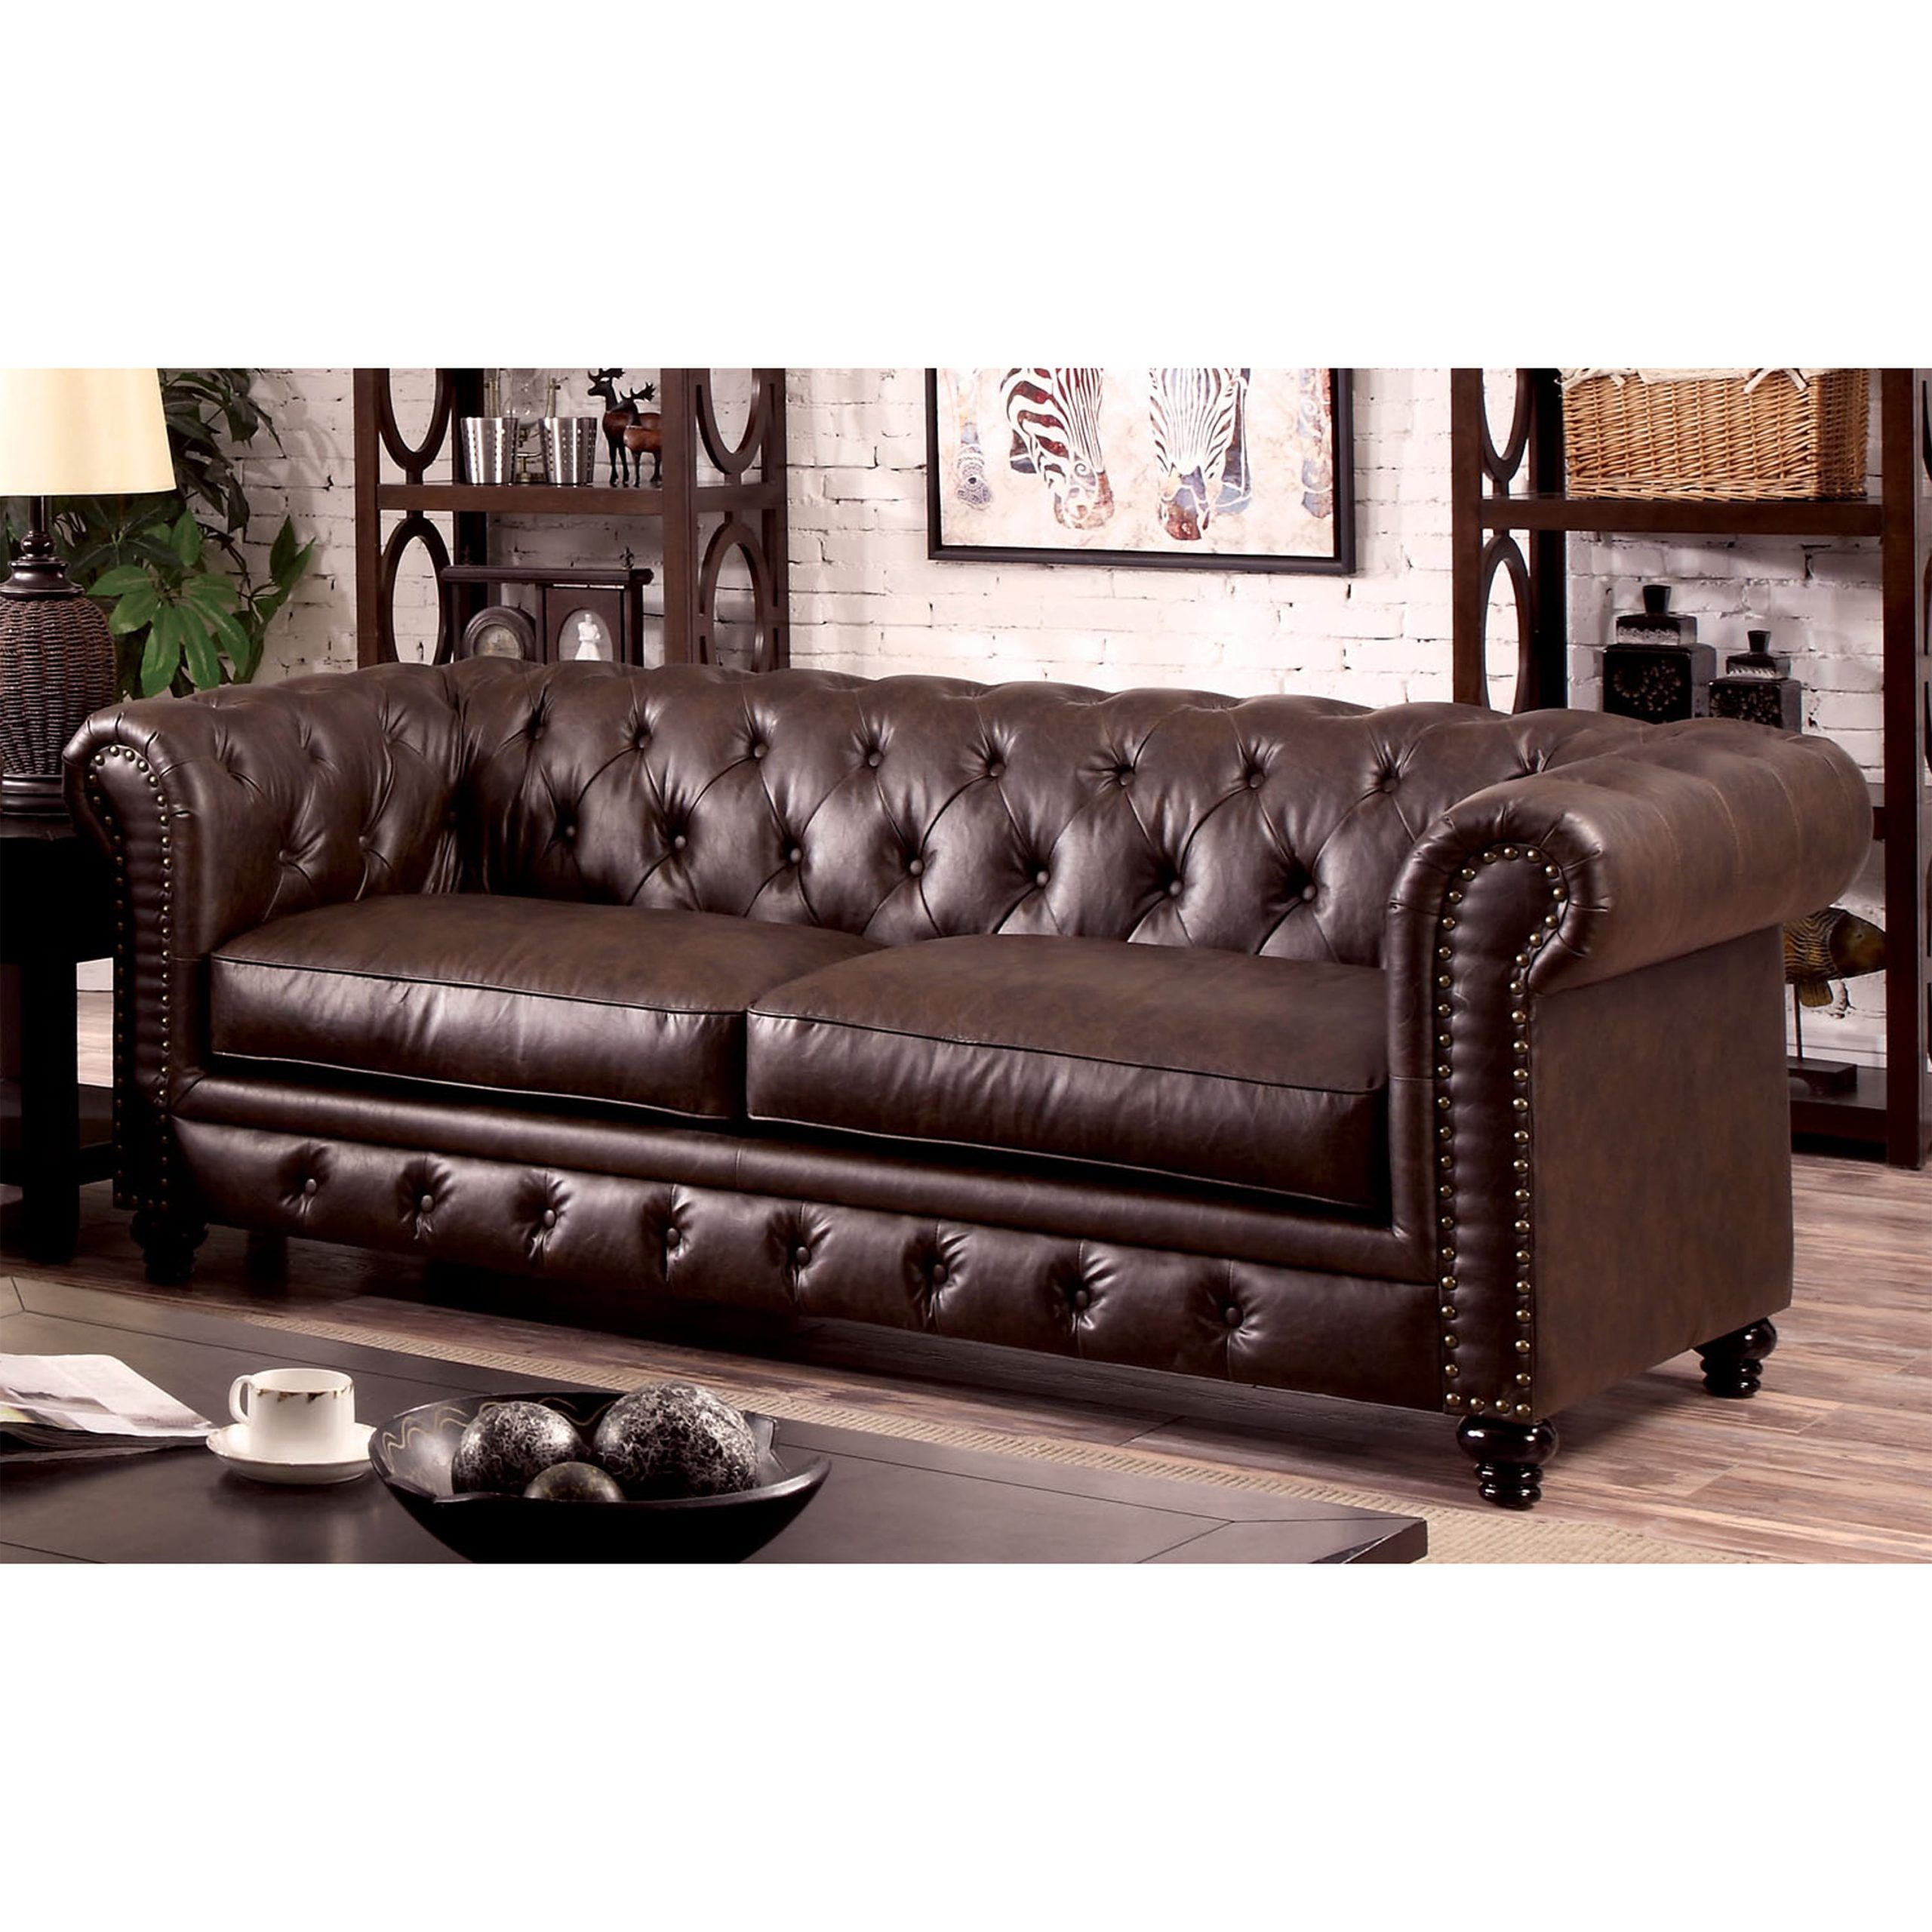 Furniture Of America Tufted Glam Faux Leather Nyssa Tuxedo Sofa, Brown Inside Faux Leather Sofas In Chocolate Brown (Gallery 12 of 20)